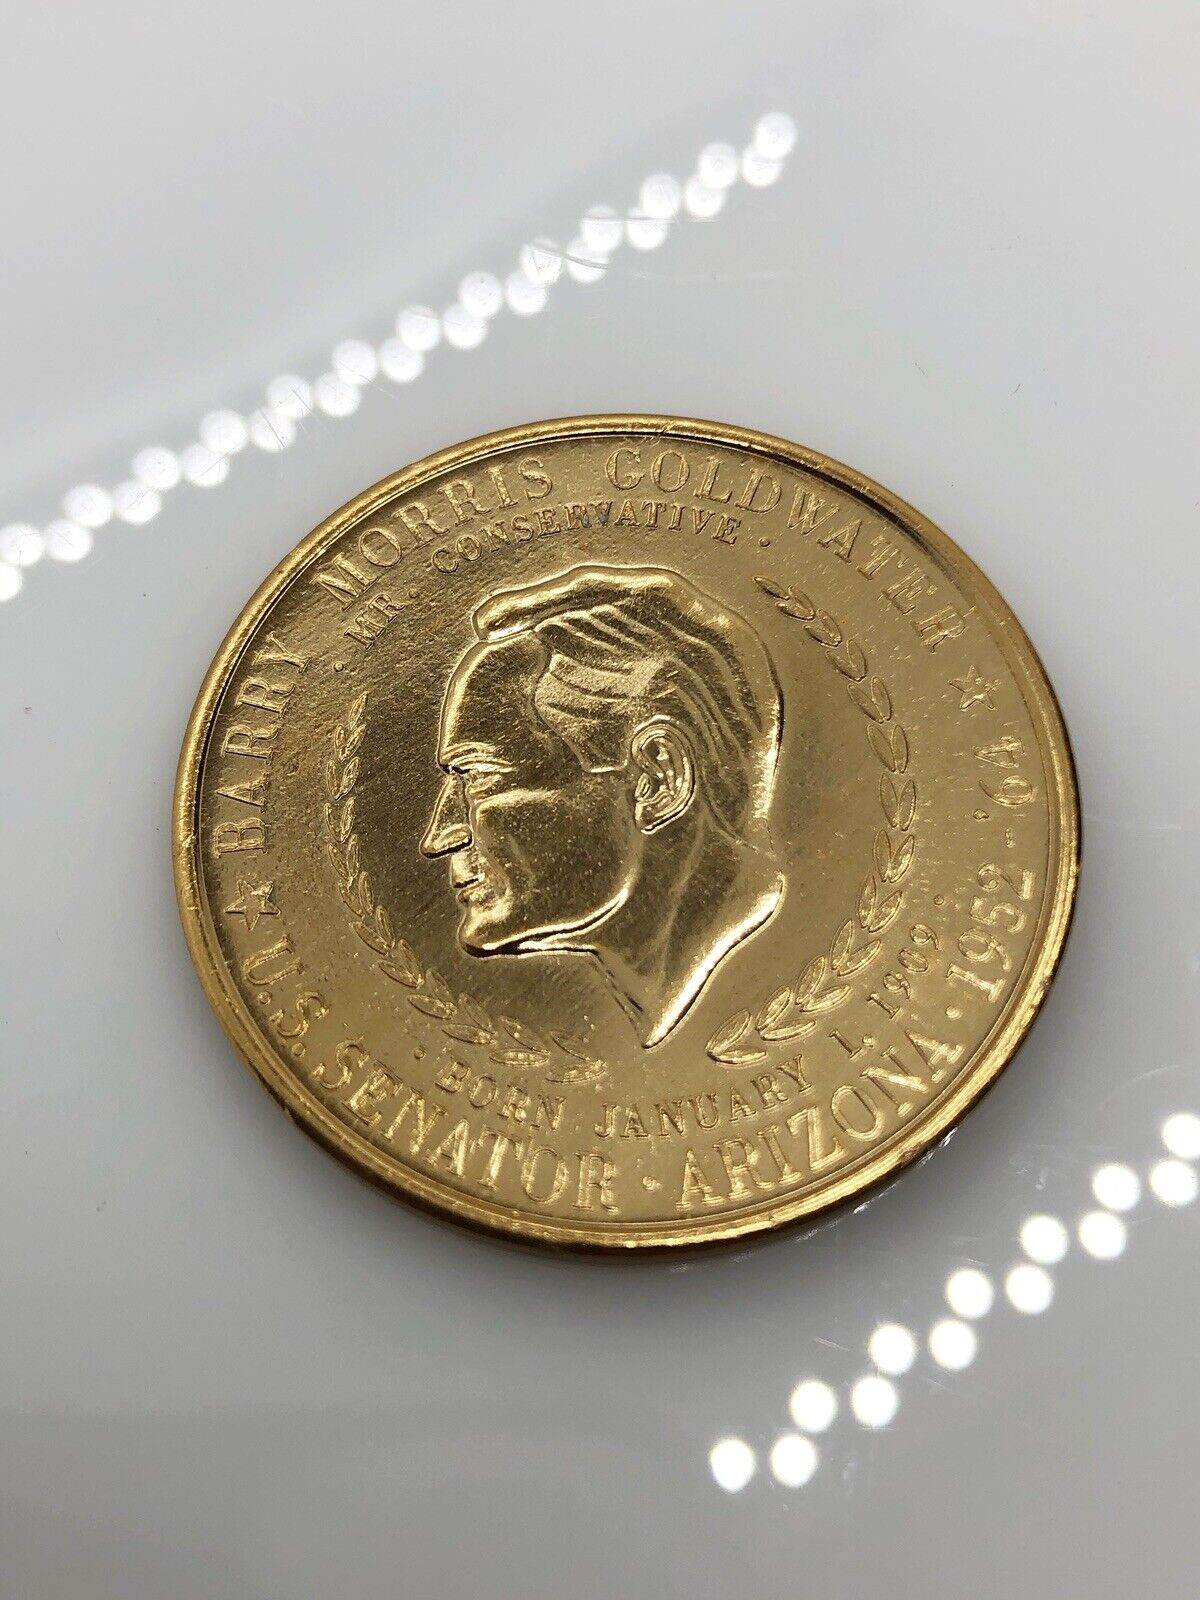 Vintage 1964 BARRY GOLDWATER FOR PRESIDENT USA Freedom Dollar Token Coin